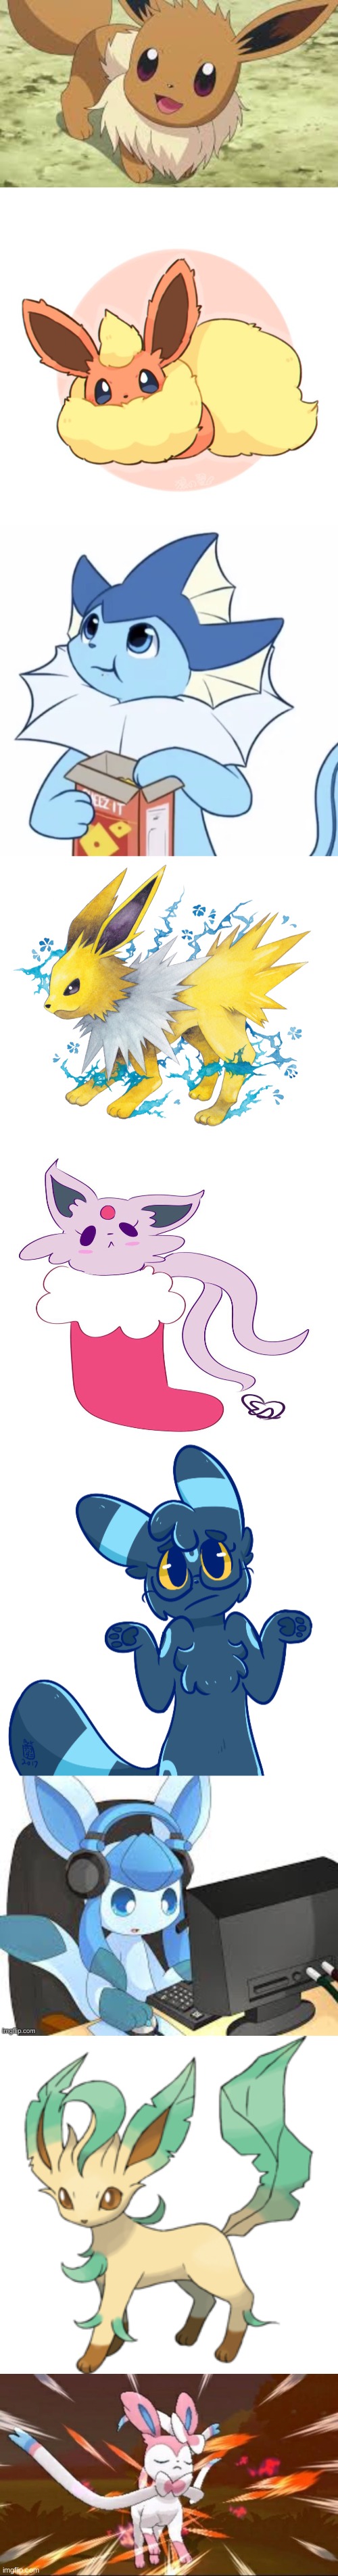 eeveelutions | image tagged in eevee,too much floof,eating vaporeon,jolteon,espeon in a stocking,umbreon shrug | made w/ Imgflip meme maker